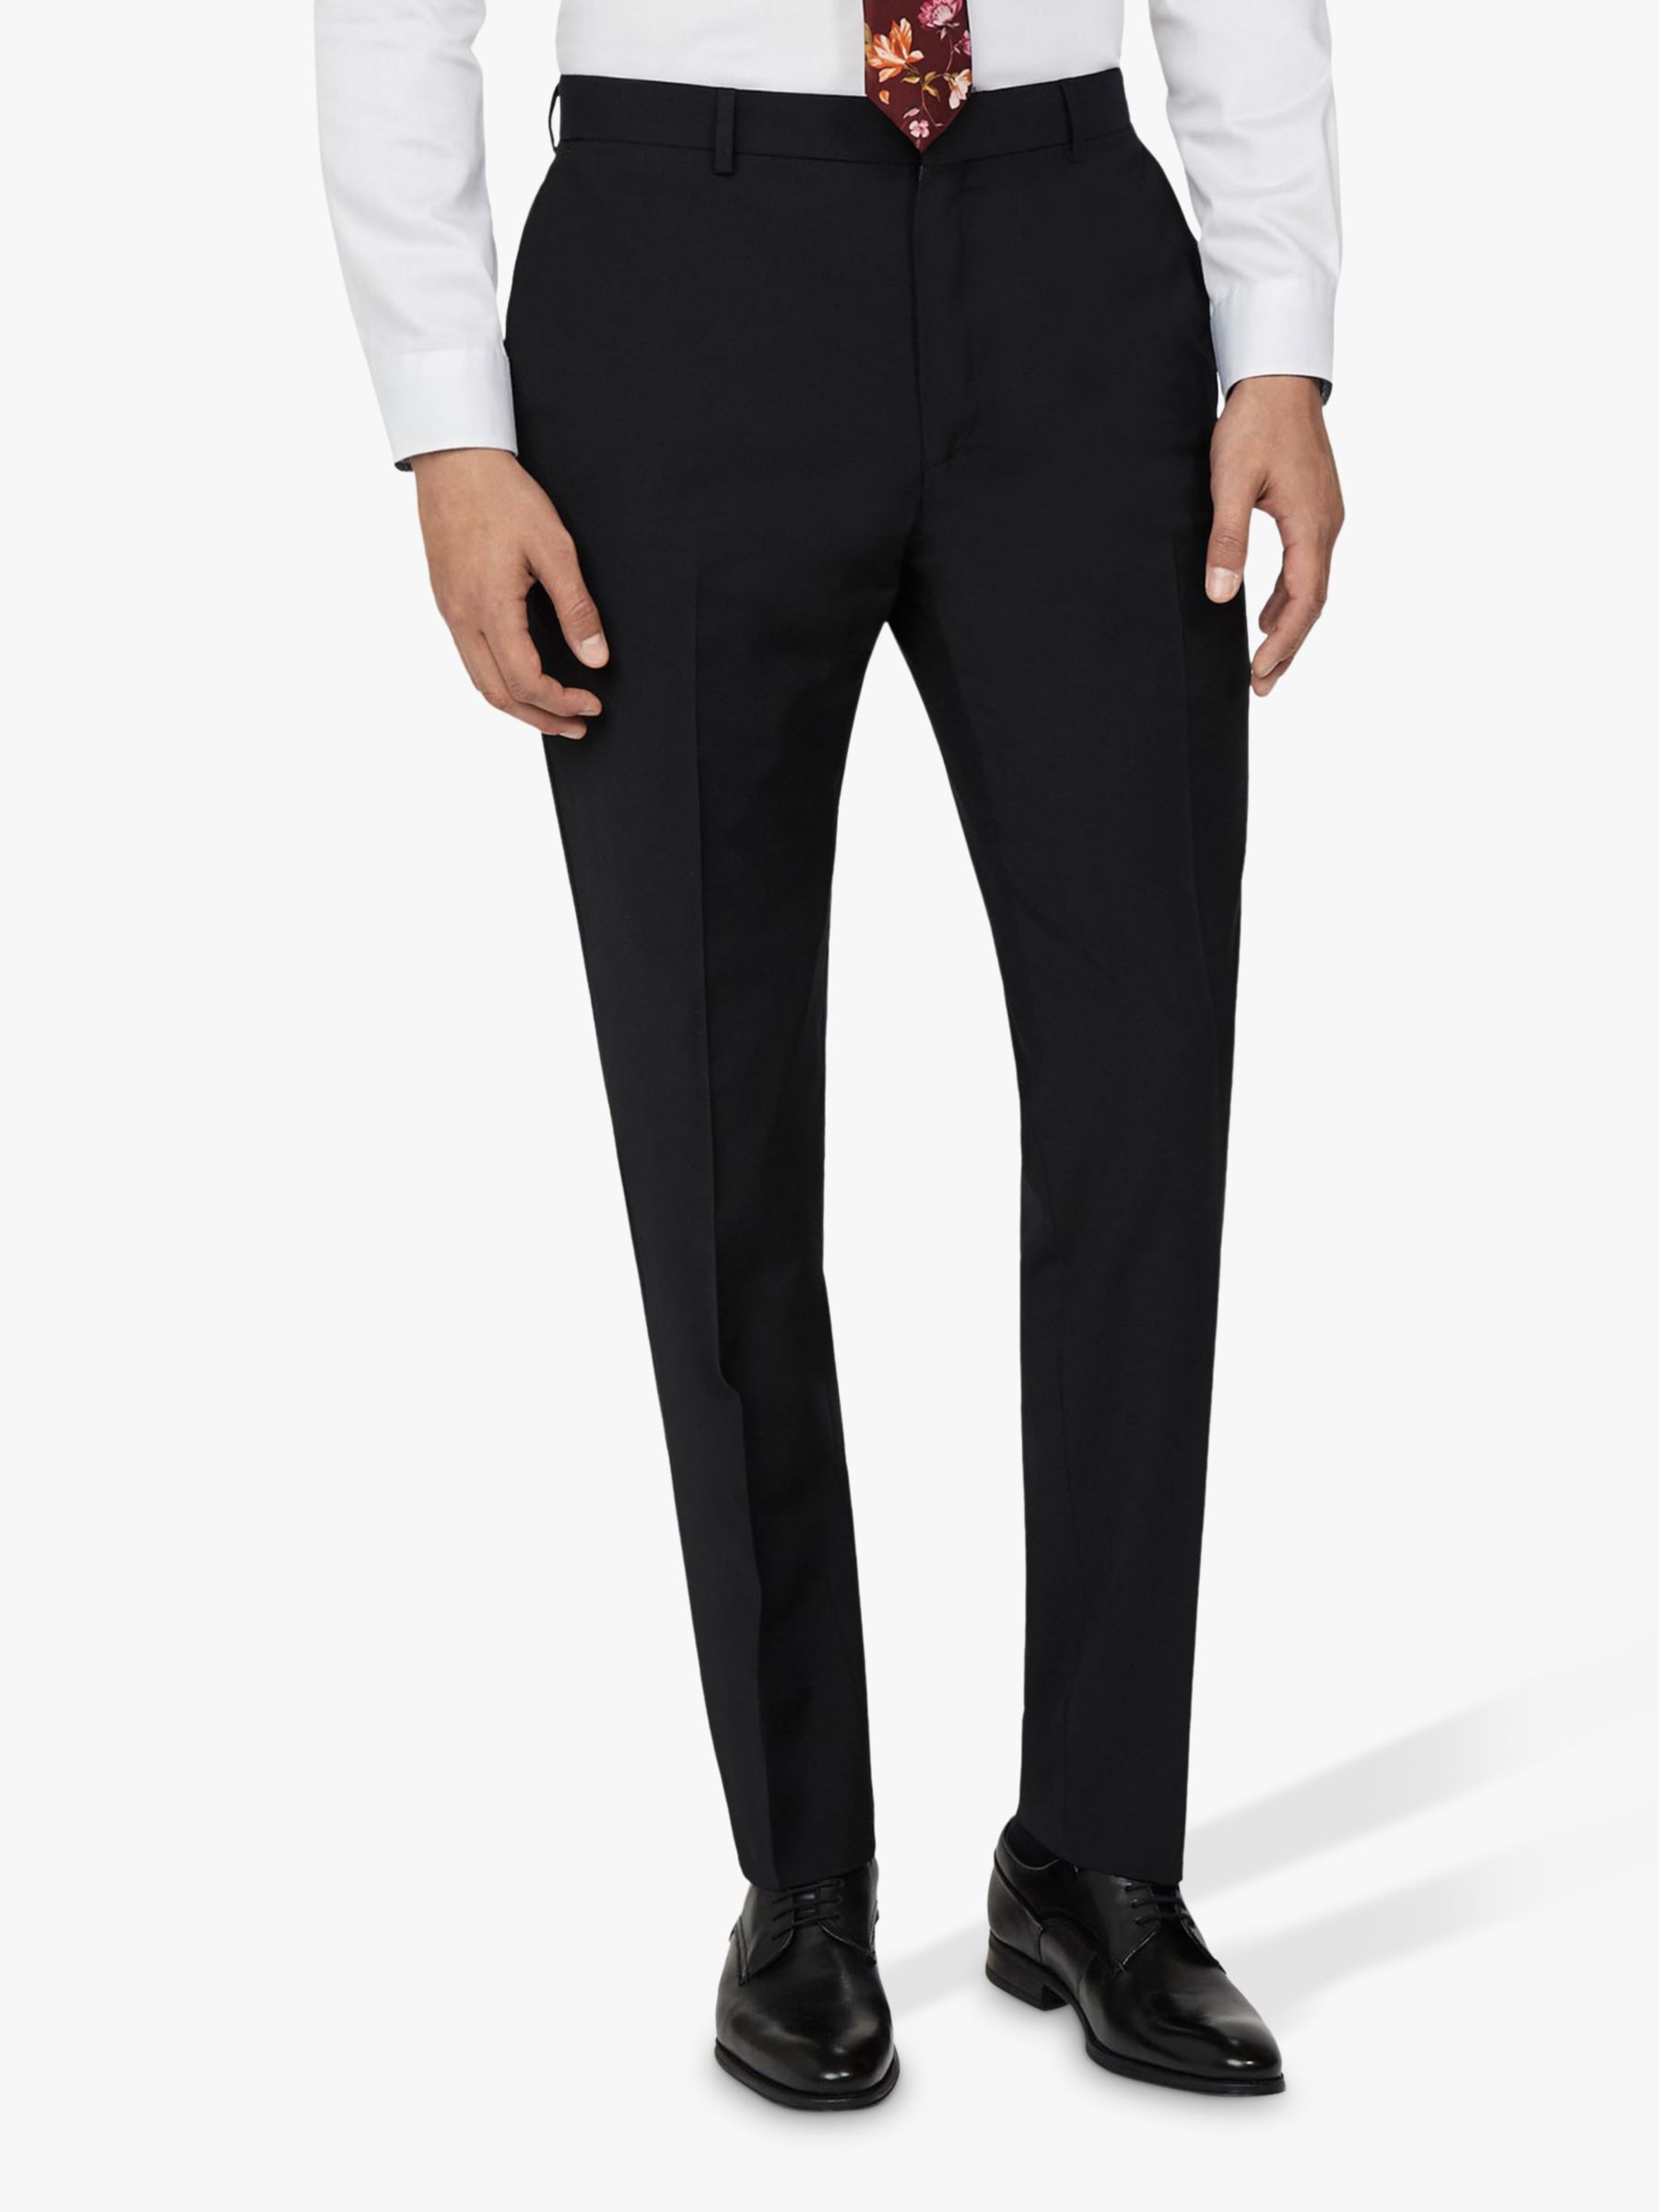 Ted Baker Panama Wool Blend Suit Trousers, Black, 32S